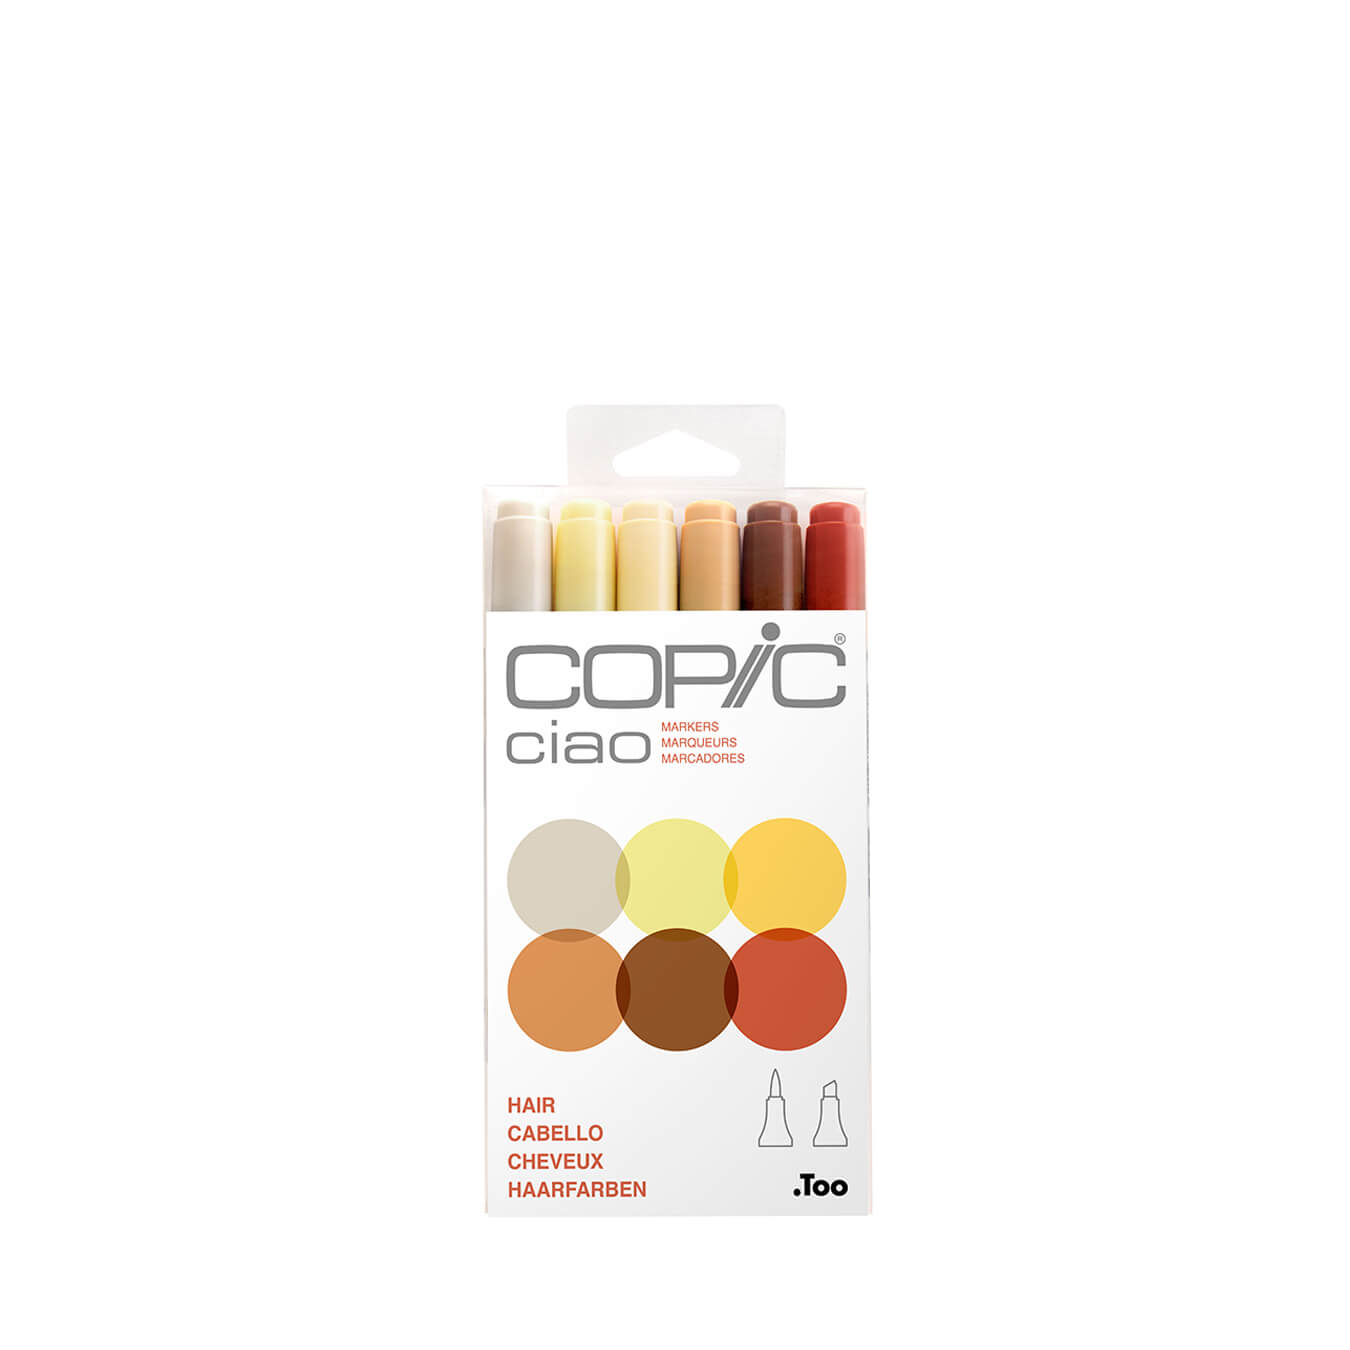 Copic Ciao 6 colors set Hair